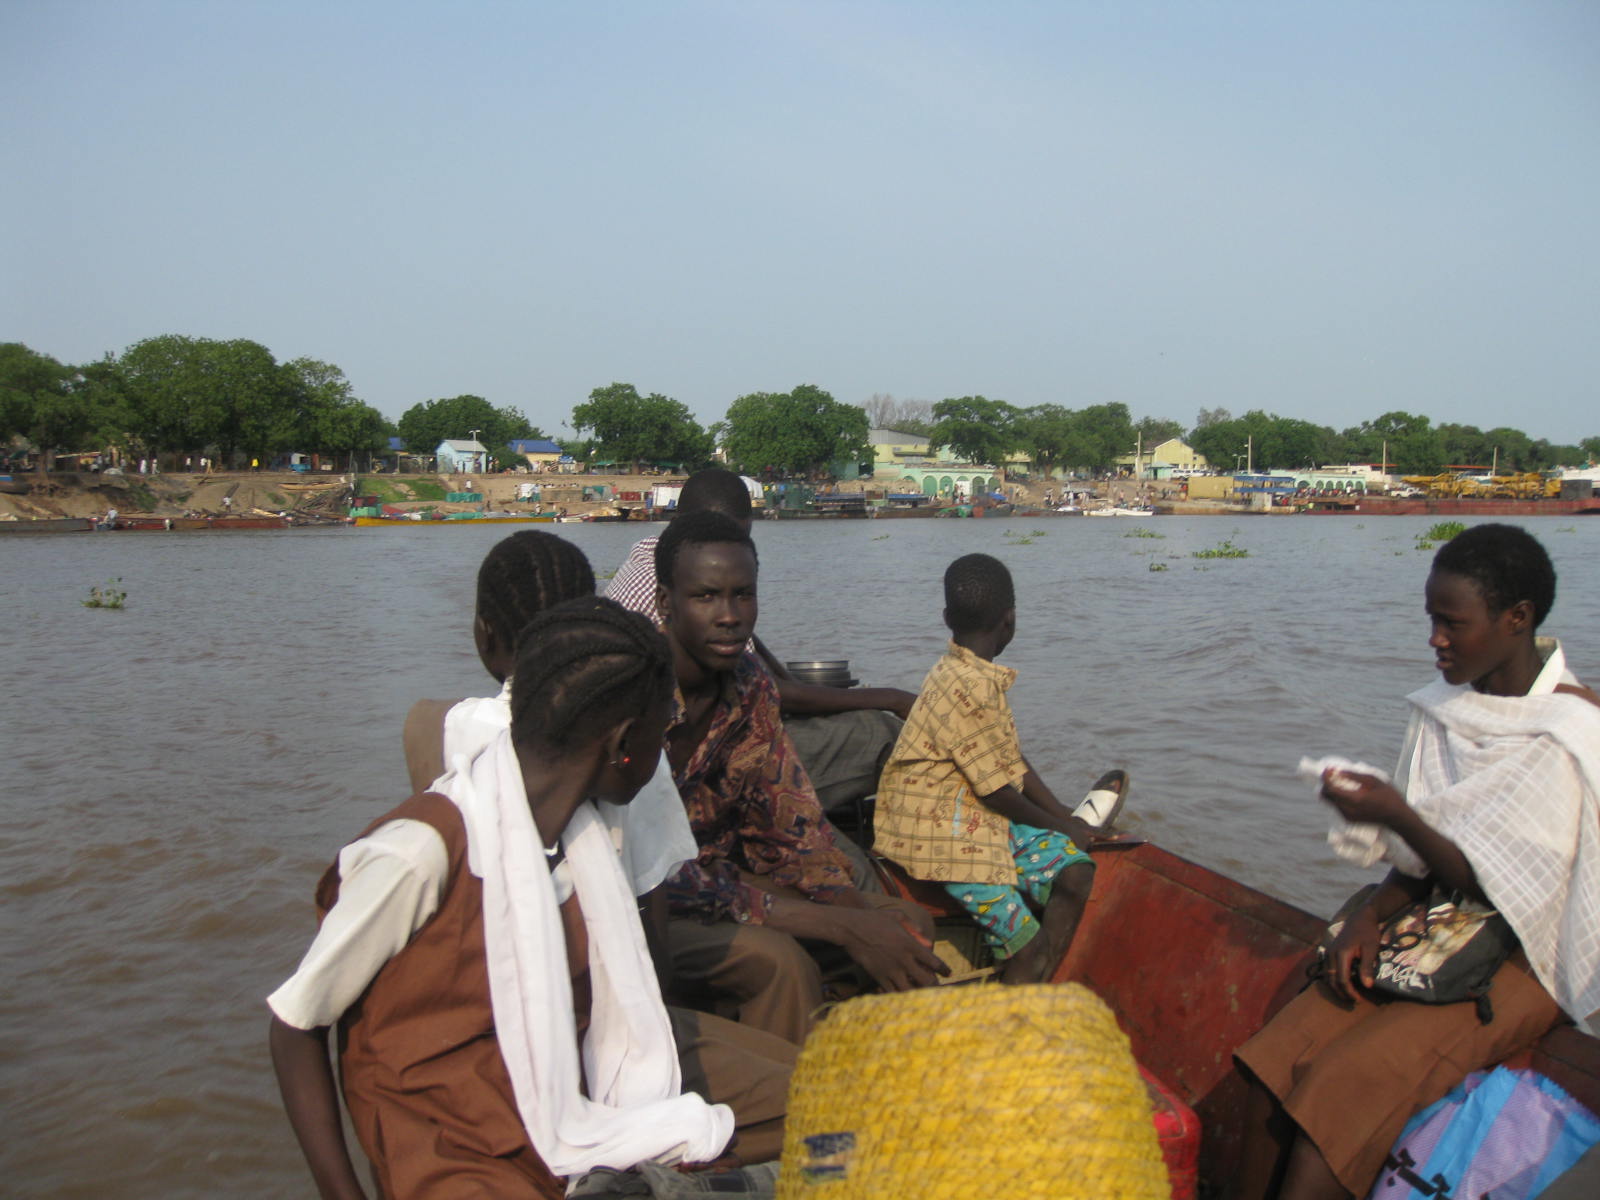 Malakal's port seen from the Nile River